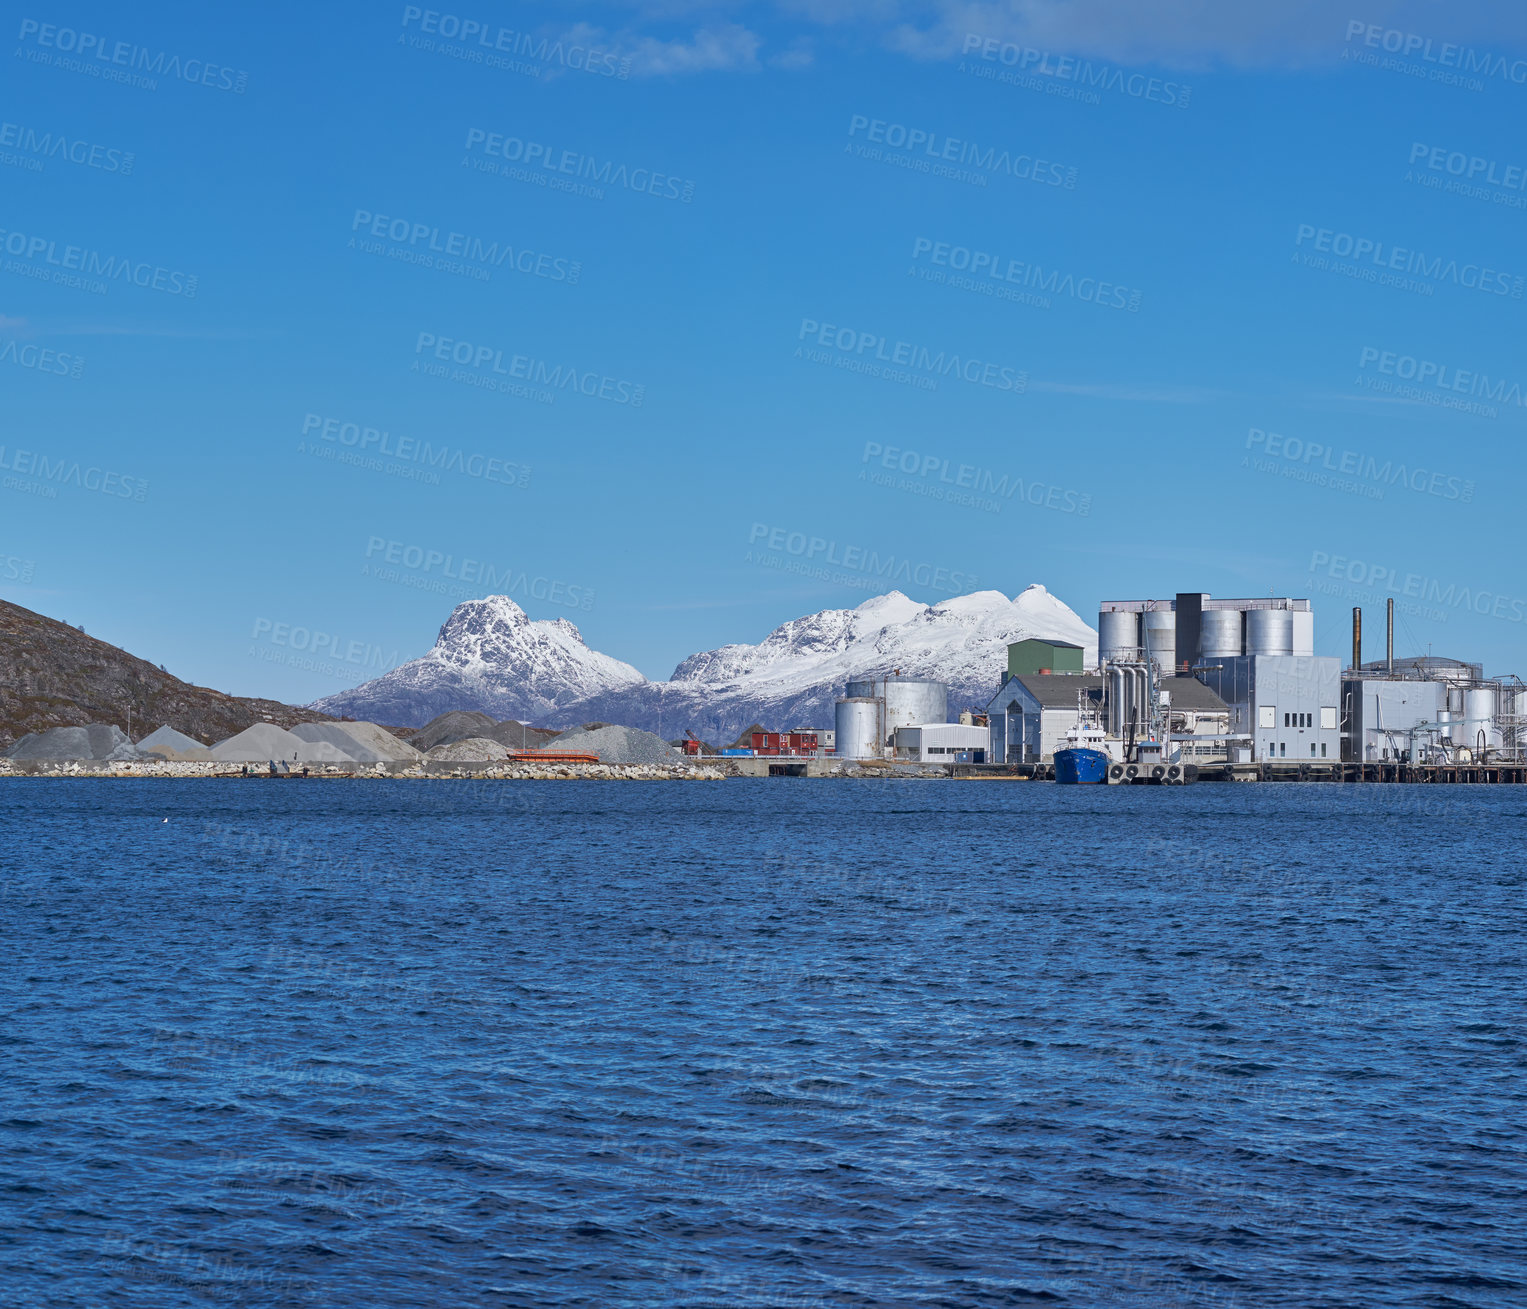 Buy stock photo The city of Bodoe and surroundings, North of the Polar Circle 